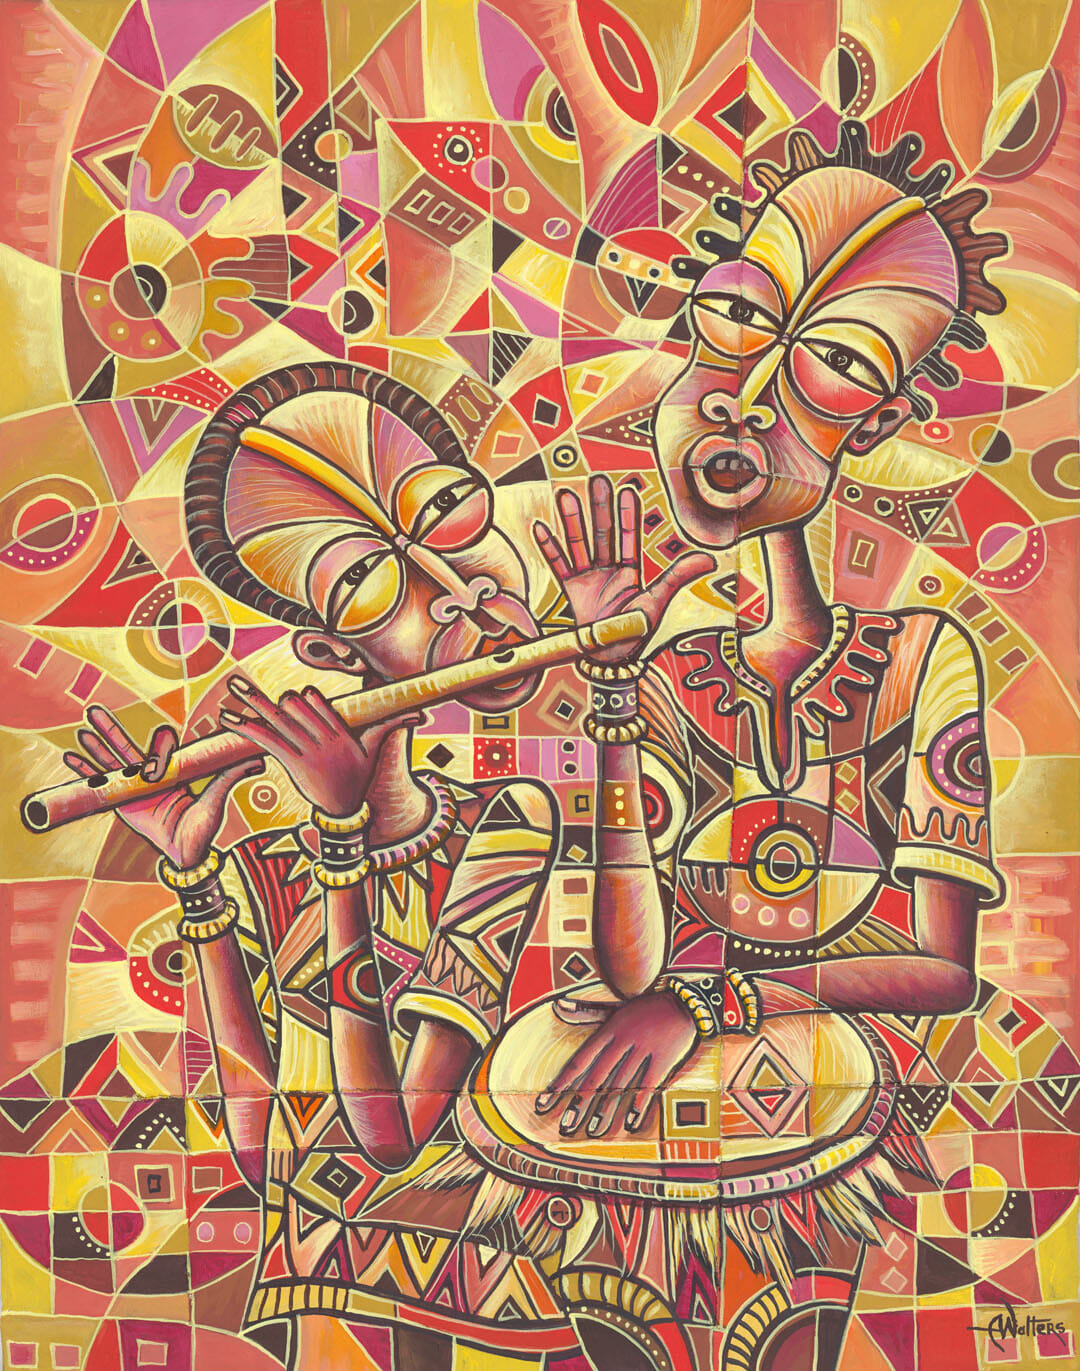 The Drummer and Flutist 3 painting from Africa